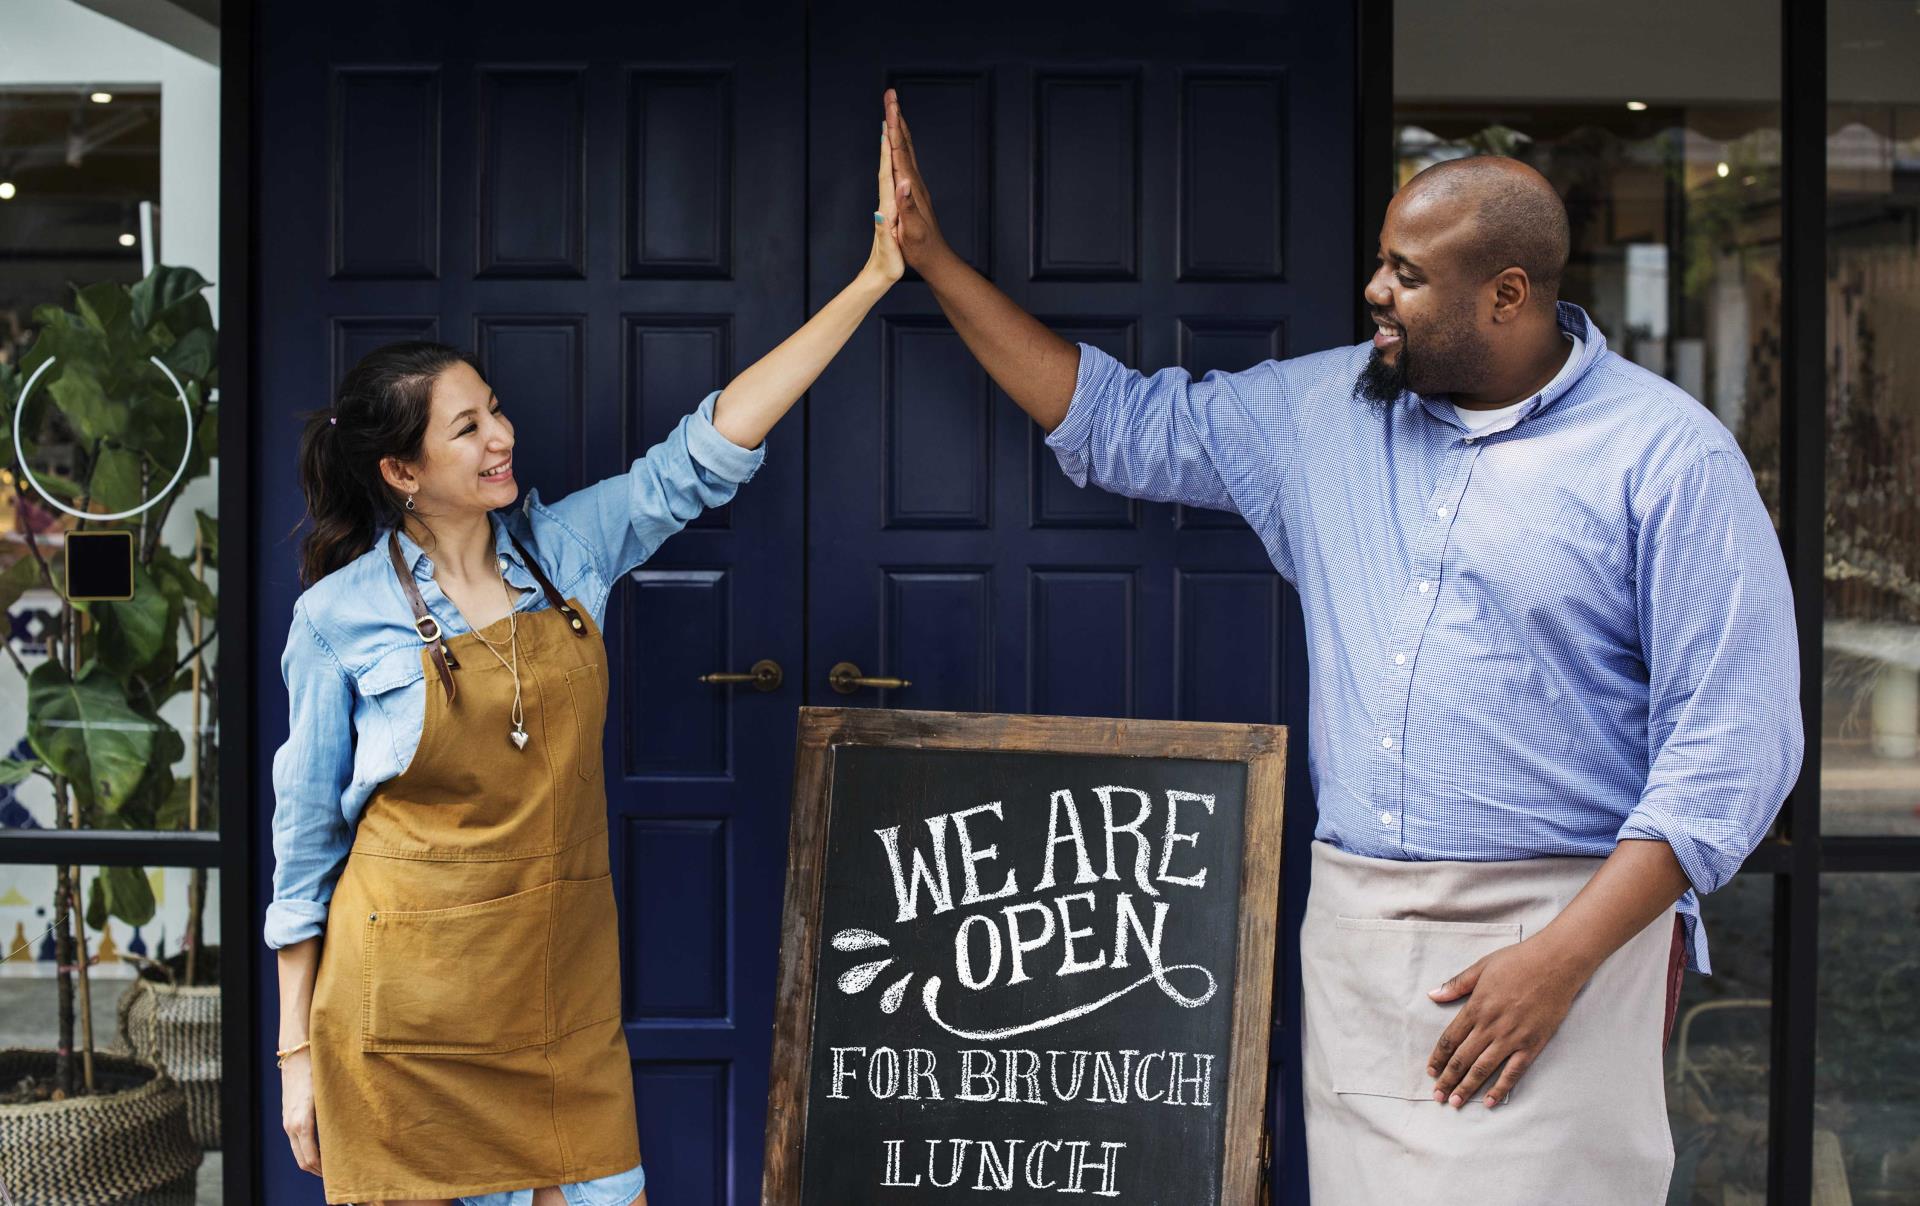 Woman and man high fiving in front of open sign